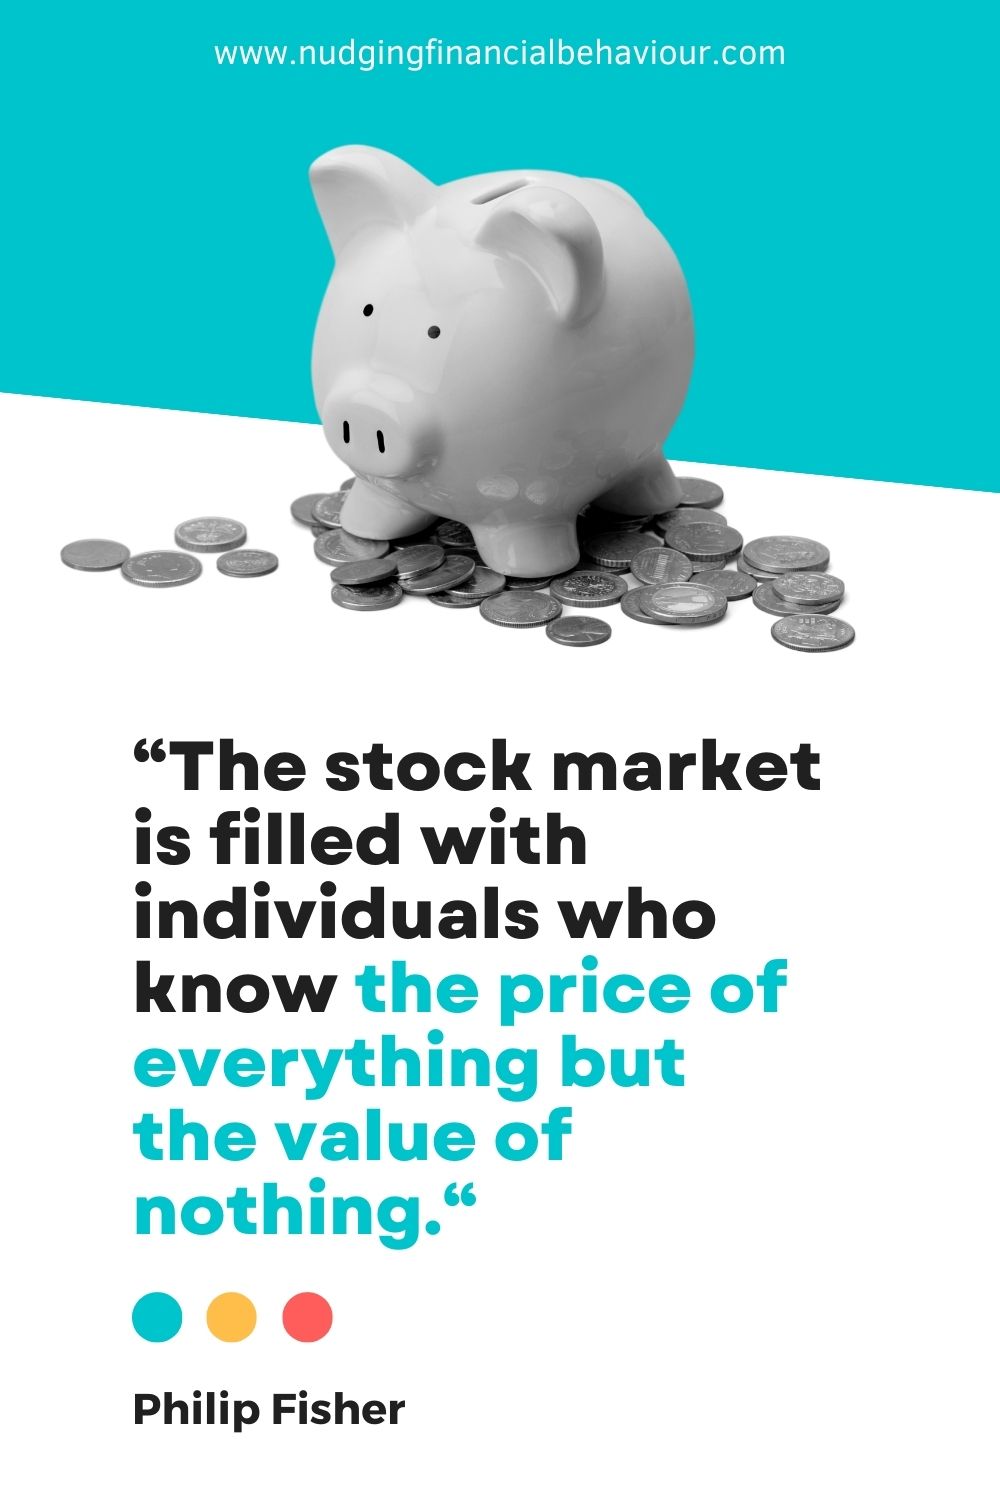 Quote about the stock market